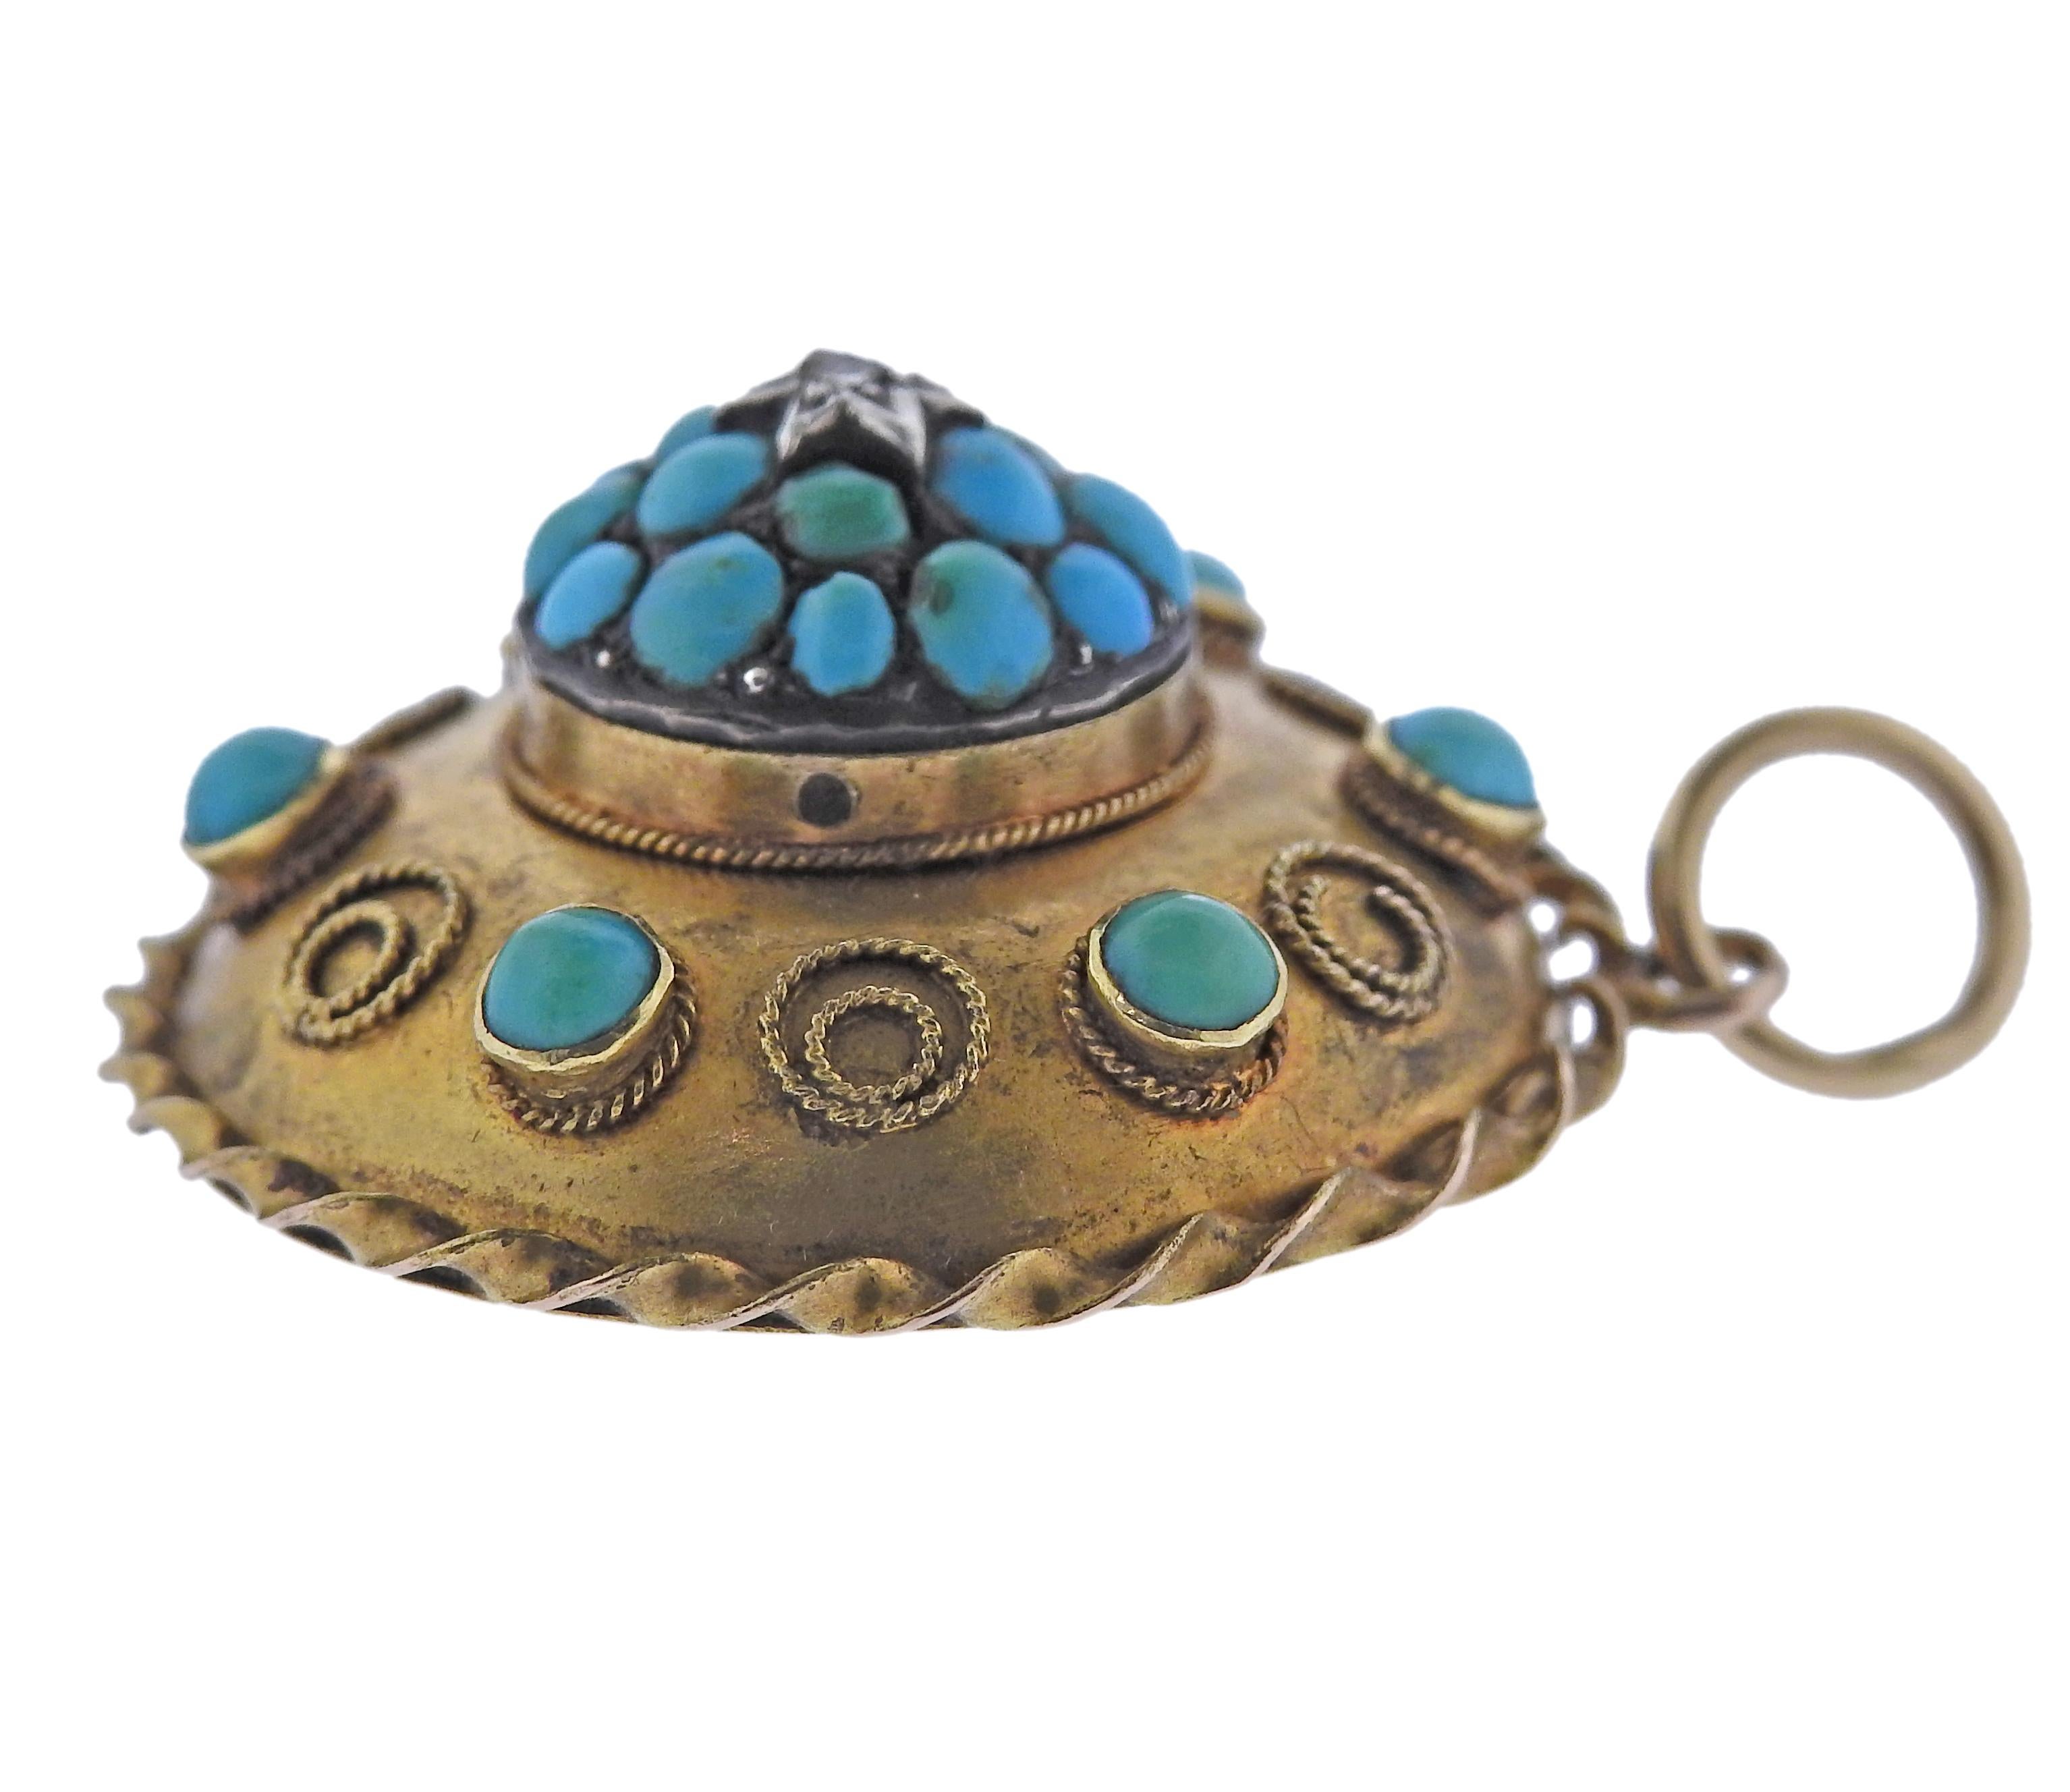 Antique Victorian 14k gold locket pendant, 28mm in diameter. Weight 6.9 grams. Decorated with turquoise and diamond. Comes in original box.